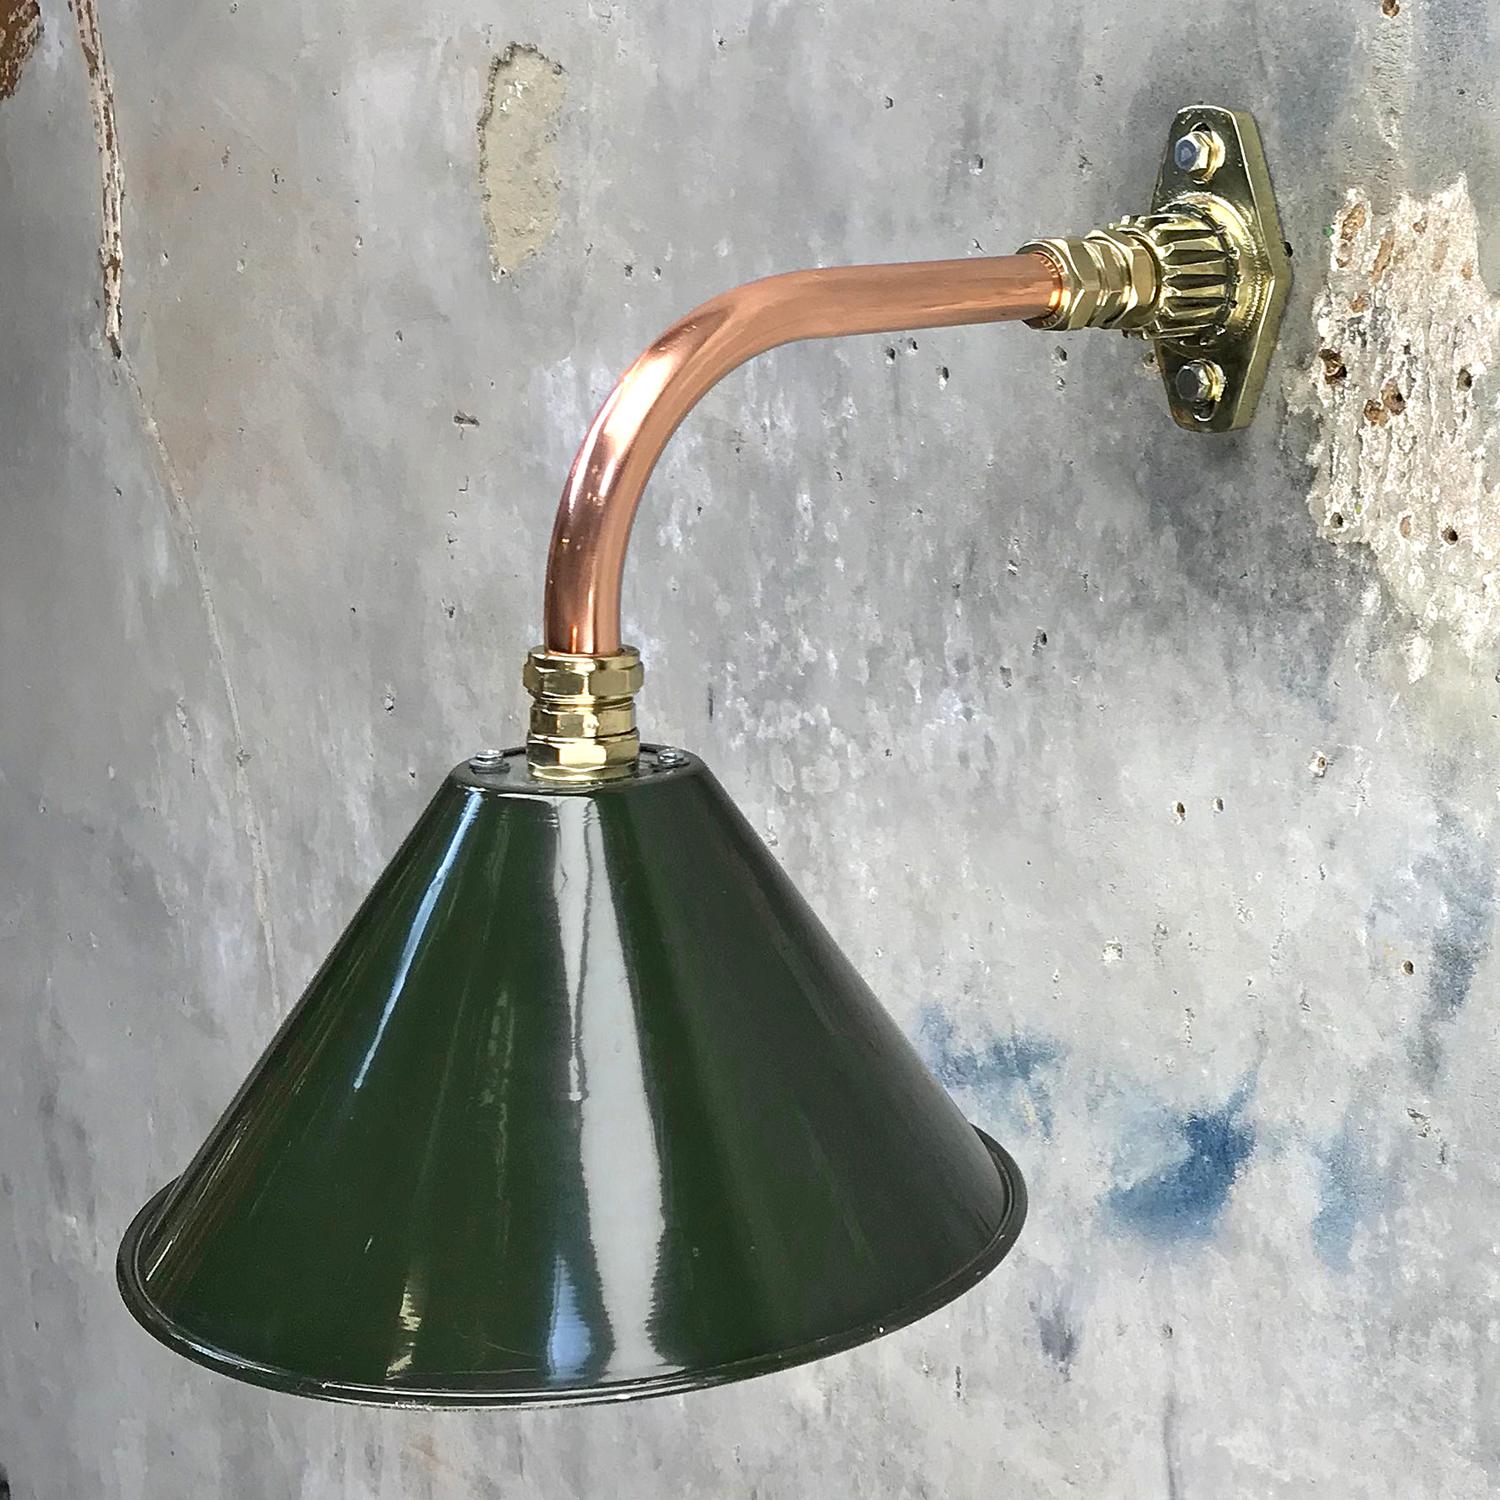 1980s Ex British Army Light Shade / Copper and Brass Cantilever, Original Green In Good Condition For Sale In Leicester, Leicestershire